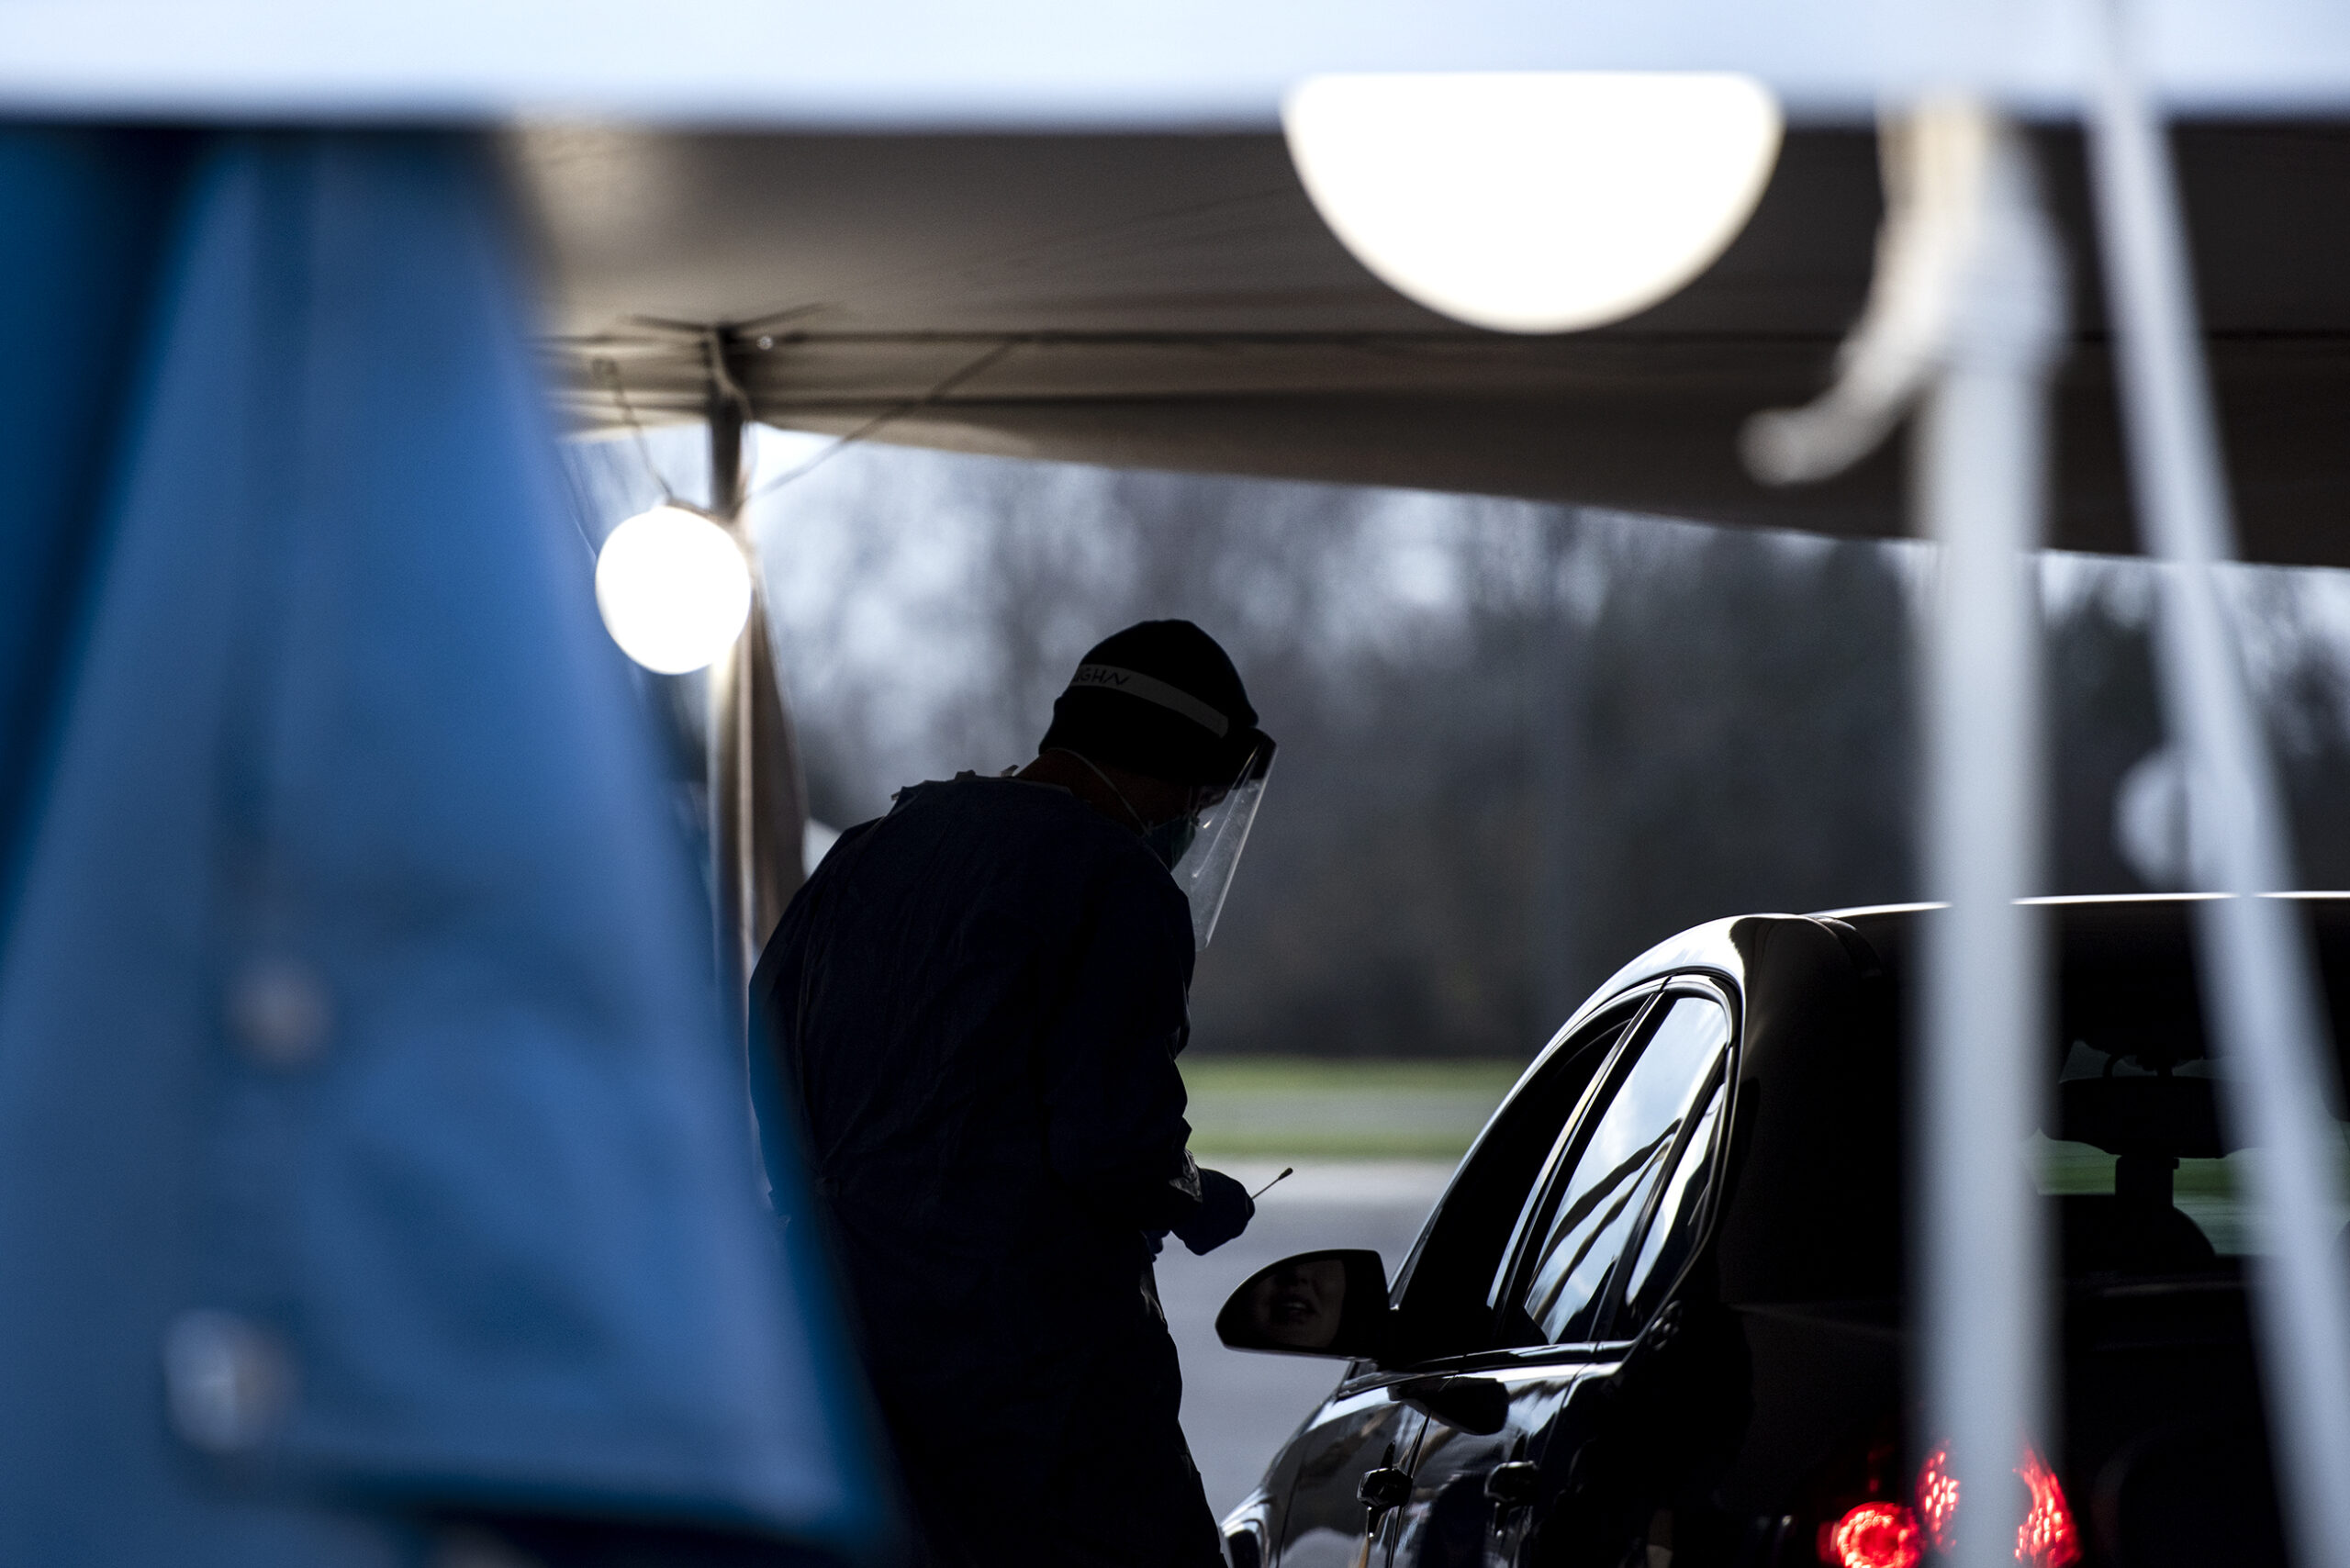 A man in a face mask holds a swab as he approaches the driver of a vehicle. The man is in silhouette and under a tent as the sun begins to set.